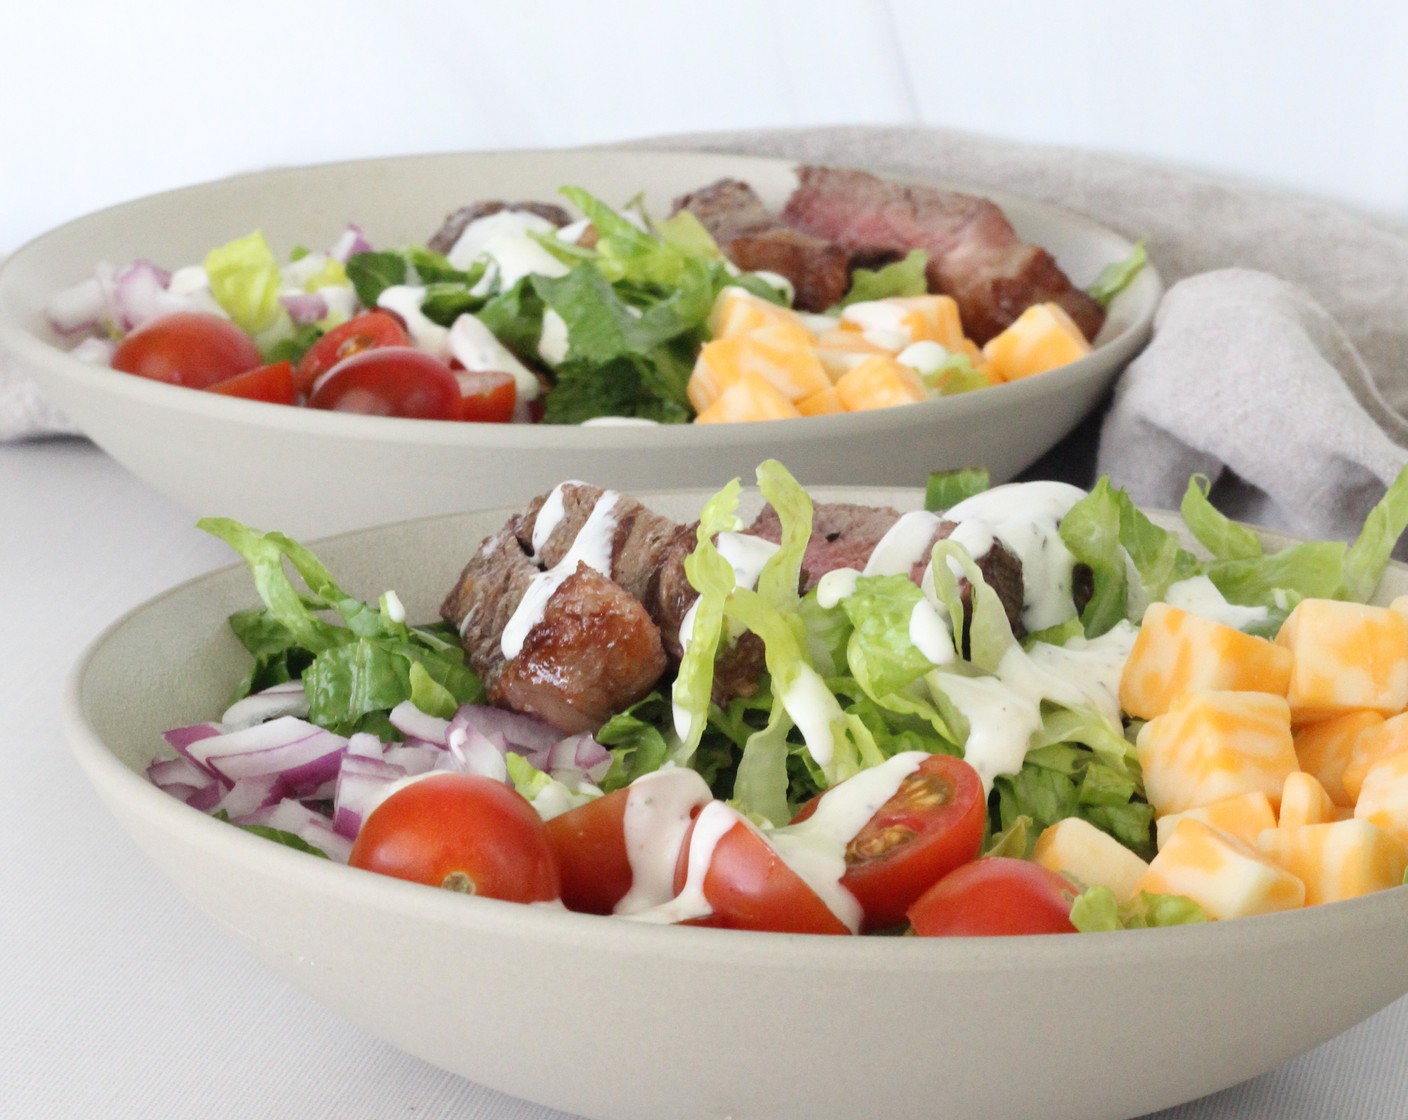 step 5 Top salads with sliced steak and add Ranch Dressing (1/3 cup) as desired.